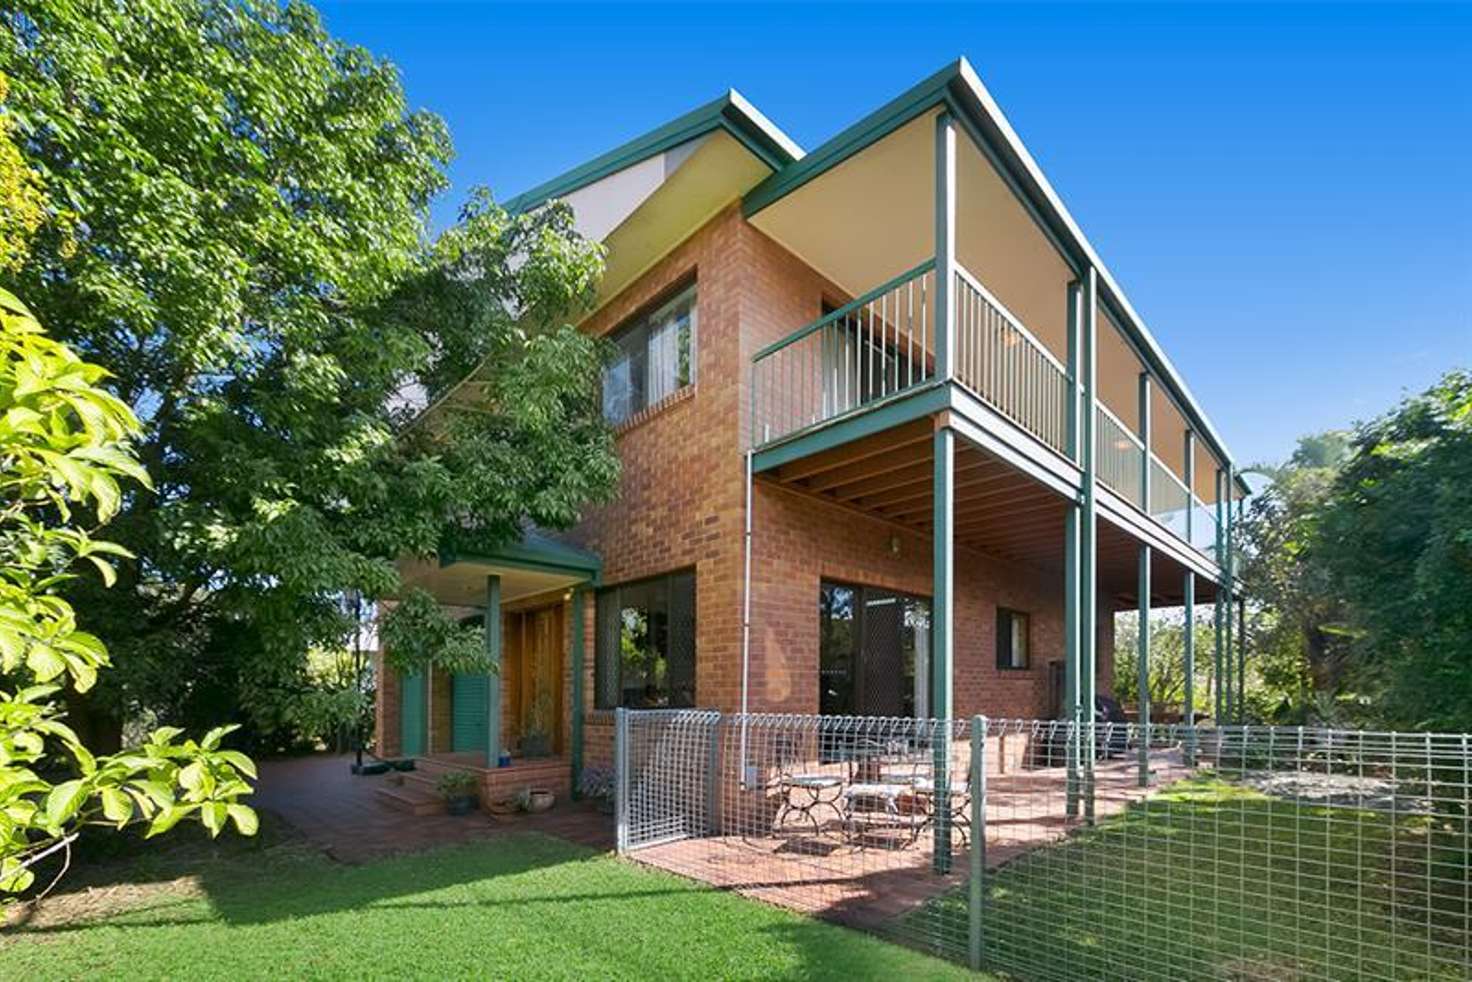 Main view of Homely house listing, 63 Vinray St, Tarragindi QLD 4121